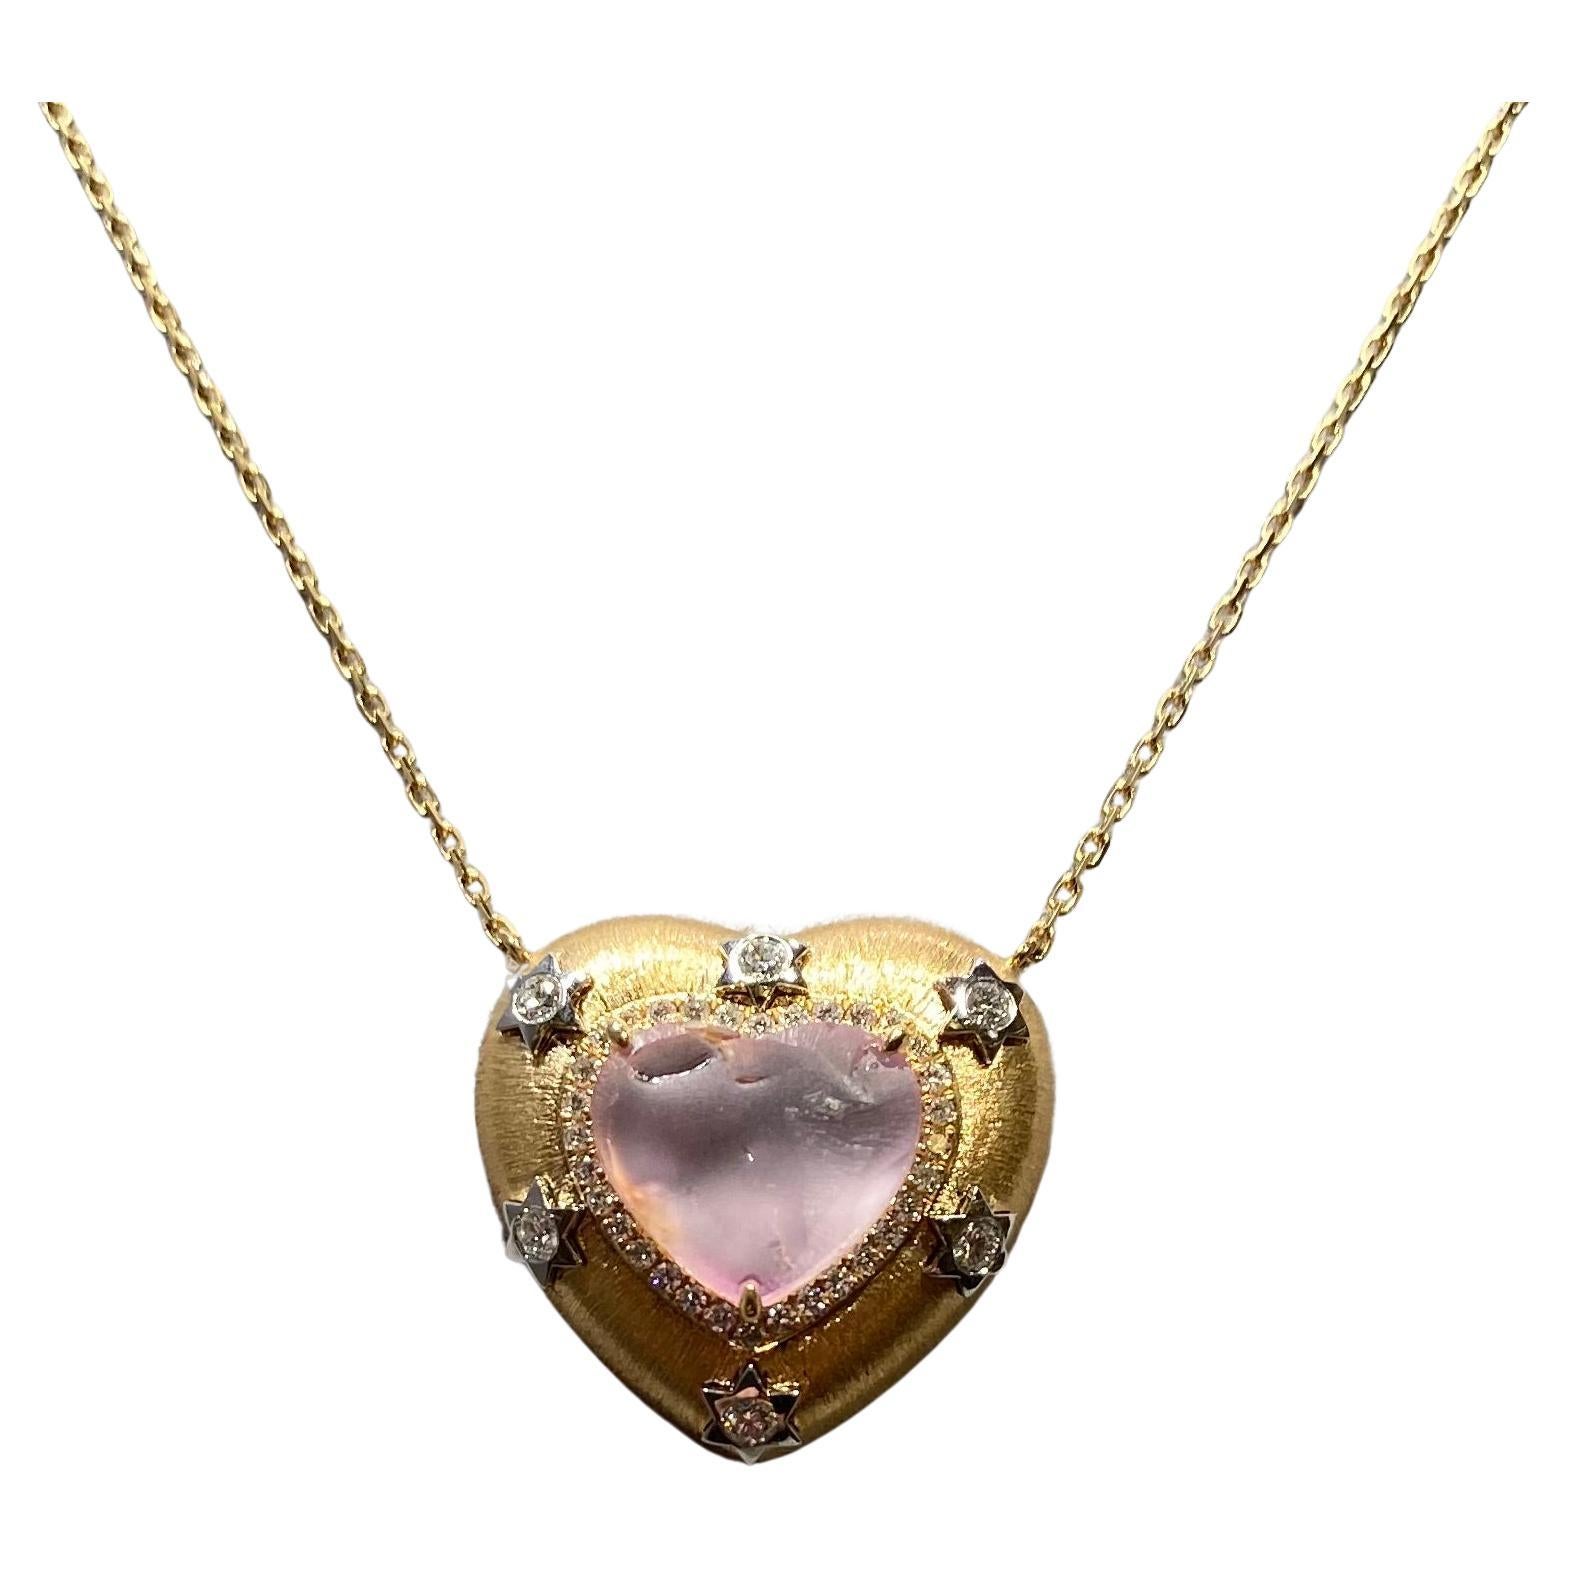 Eostre Pink Sapphire and Diamond Pendant Necklace in 18k Yellow and White Gold